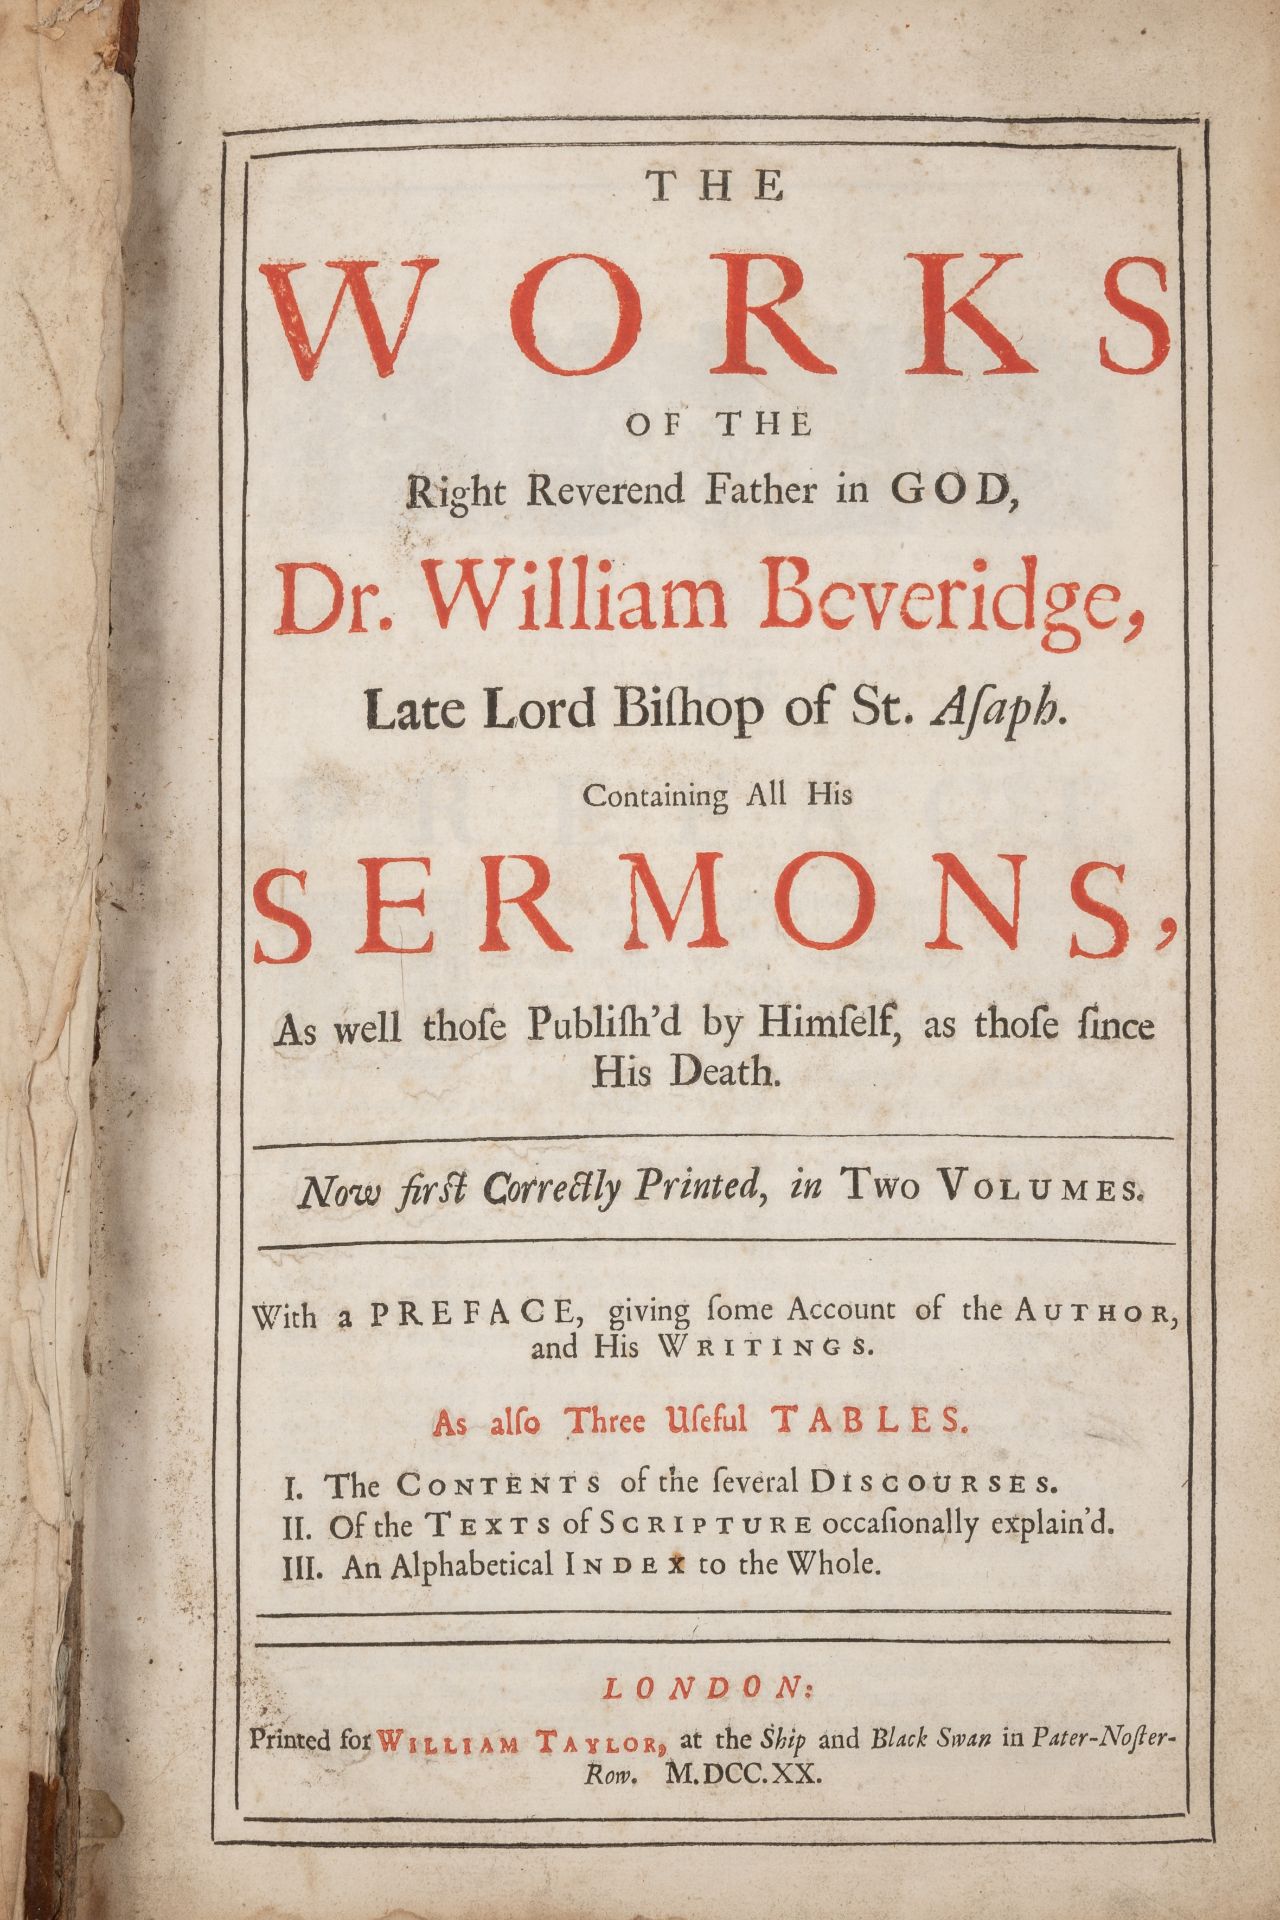 Beveridge (Dr William). Late Lord Bishop of St Asaph - Works thereof. William Taylor, London 1720. 2